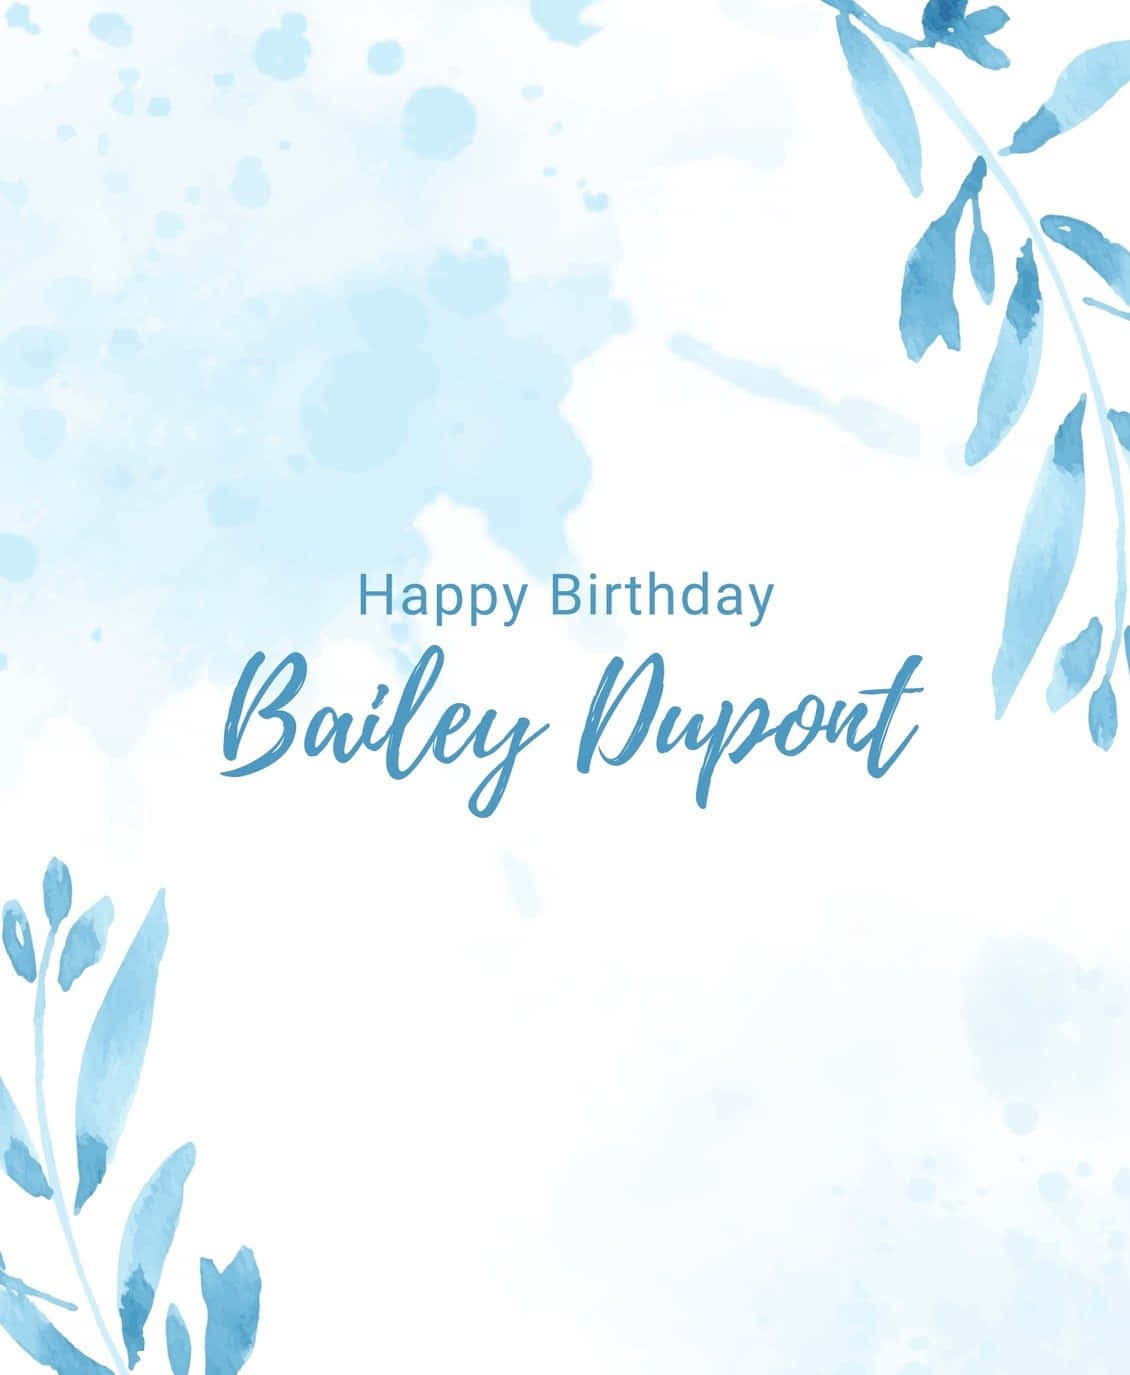 Celebrating a special day with a blue birthday background